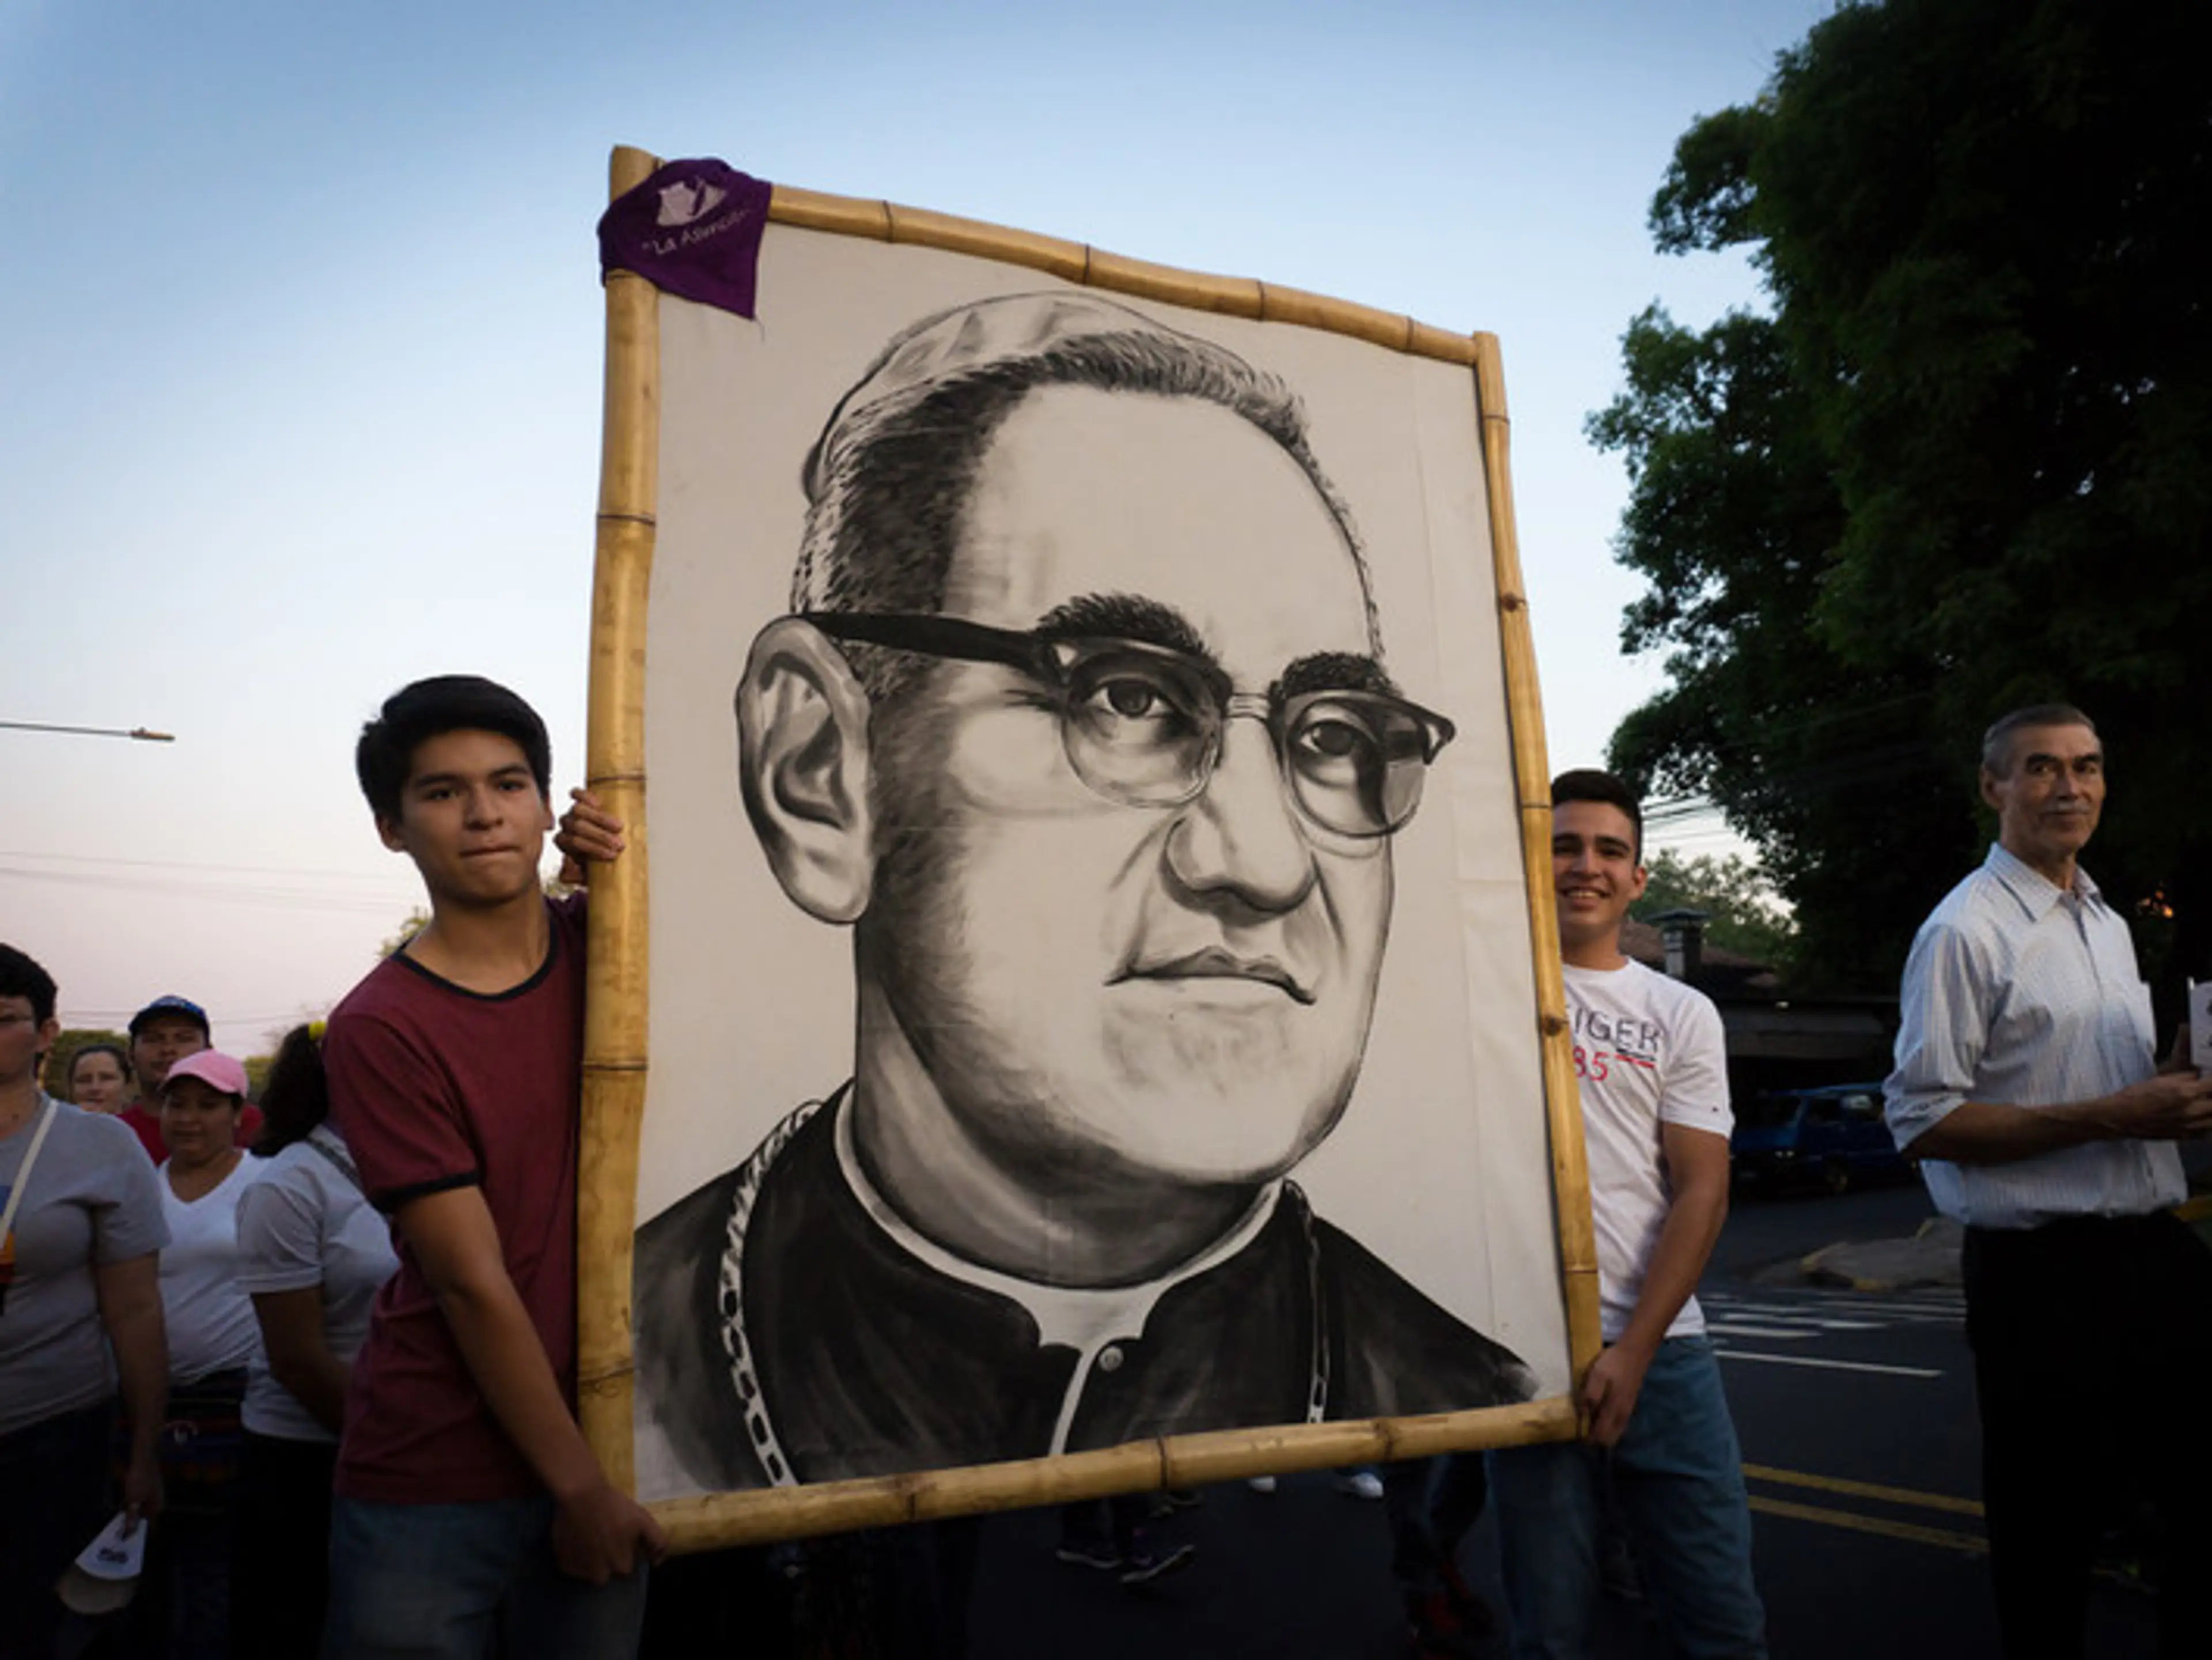 San Salvadorans mark the 37th anniversary of Romero’s martyrdom with a candlelit procession